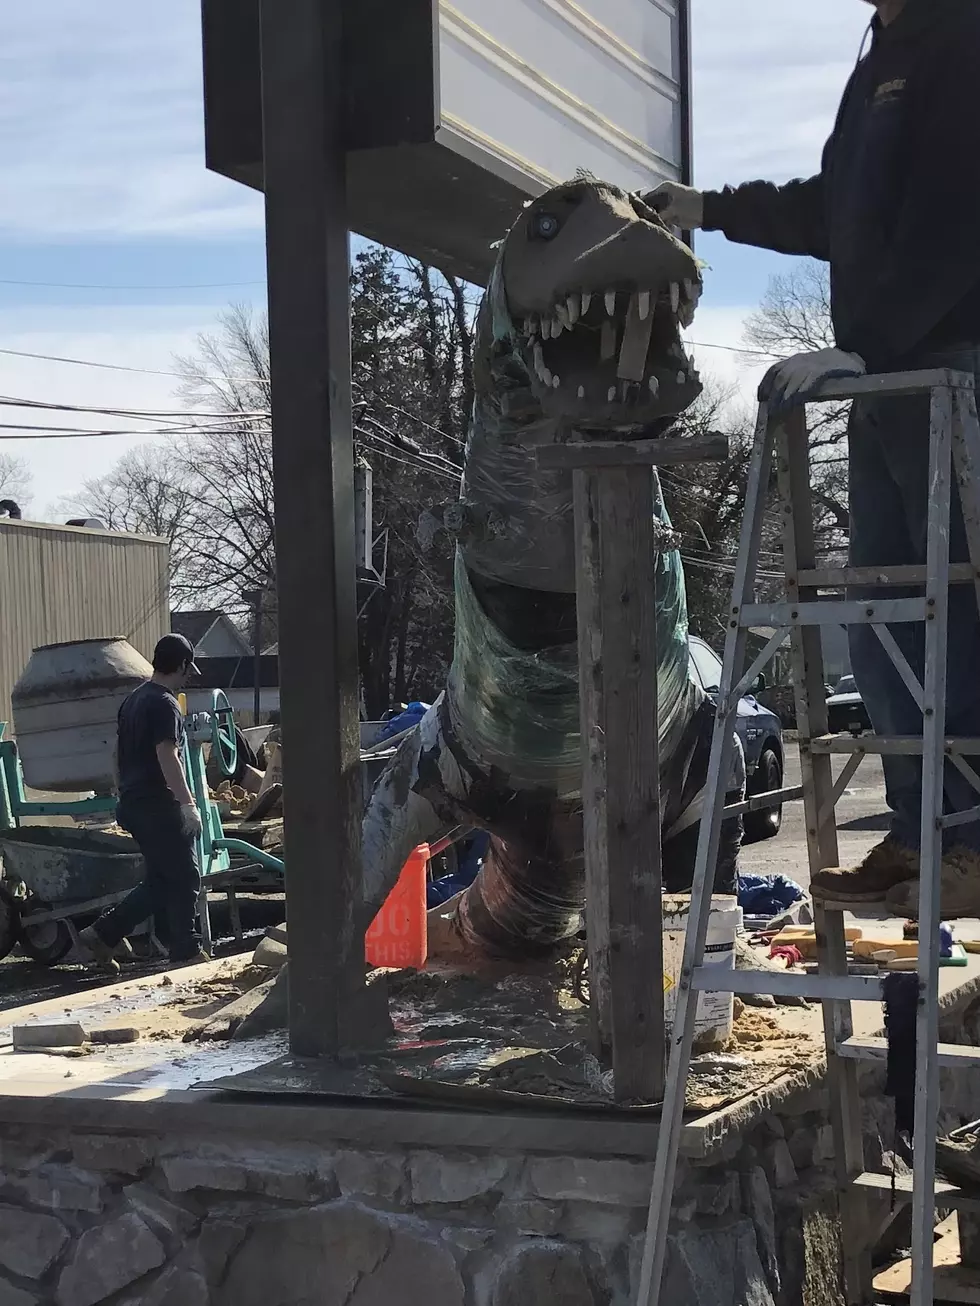 UPDATE - What's Up with the Dinosaur in Beachwood?